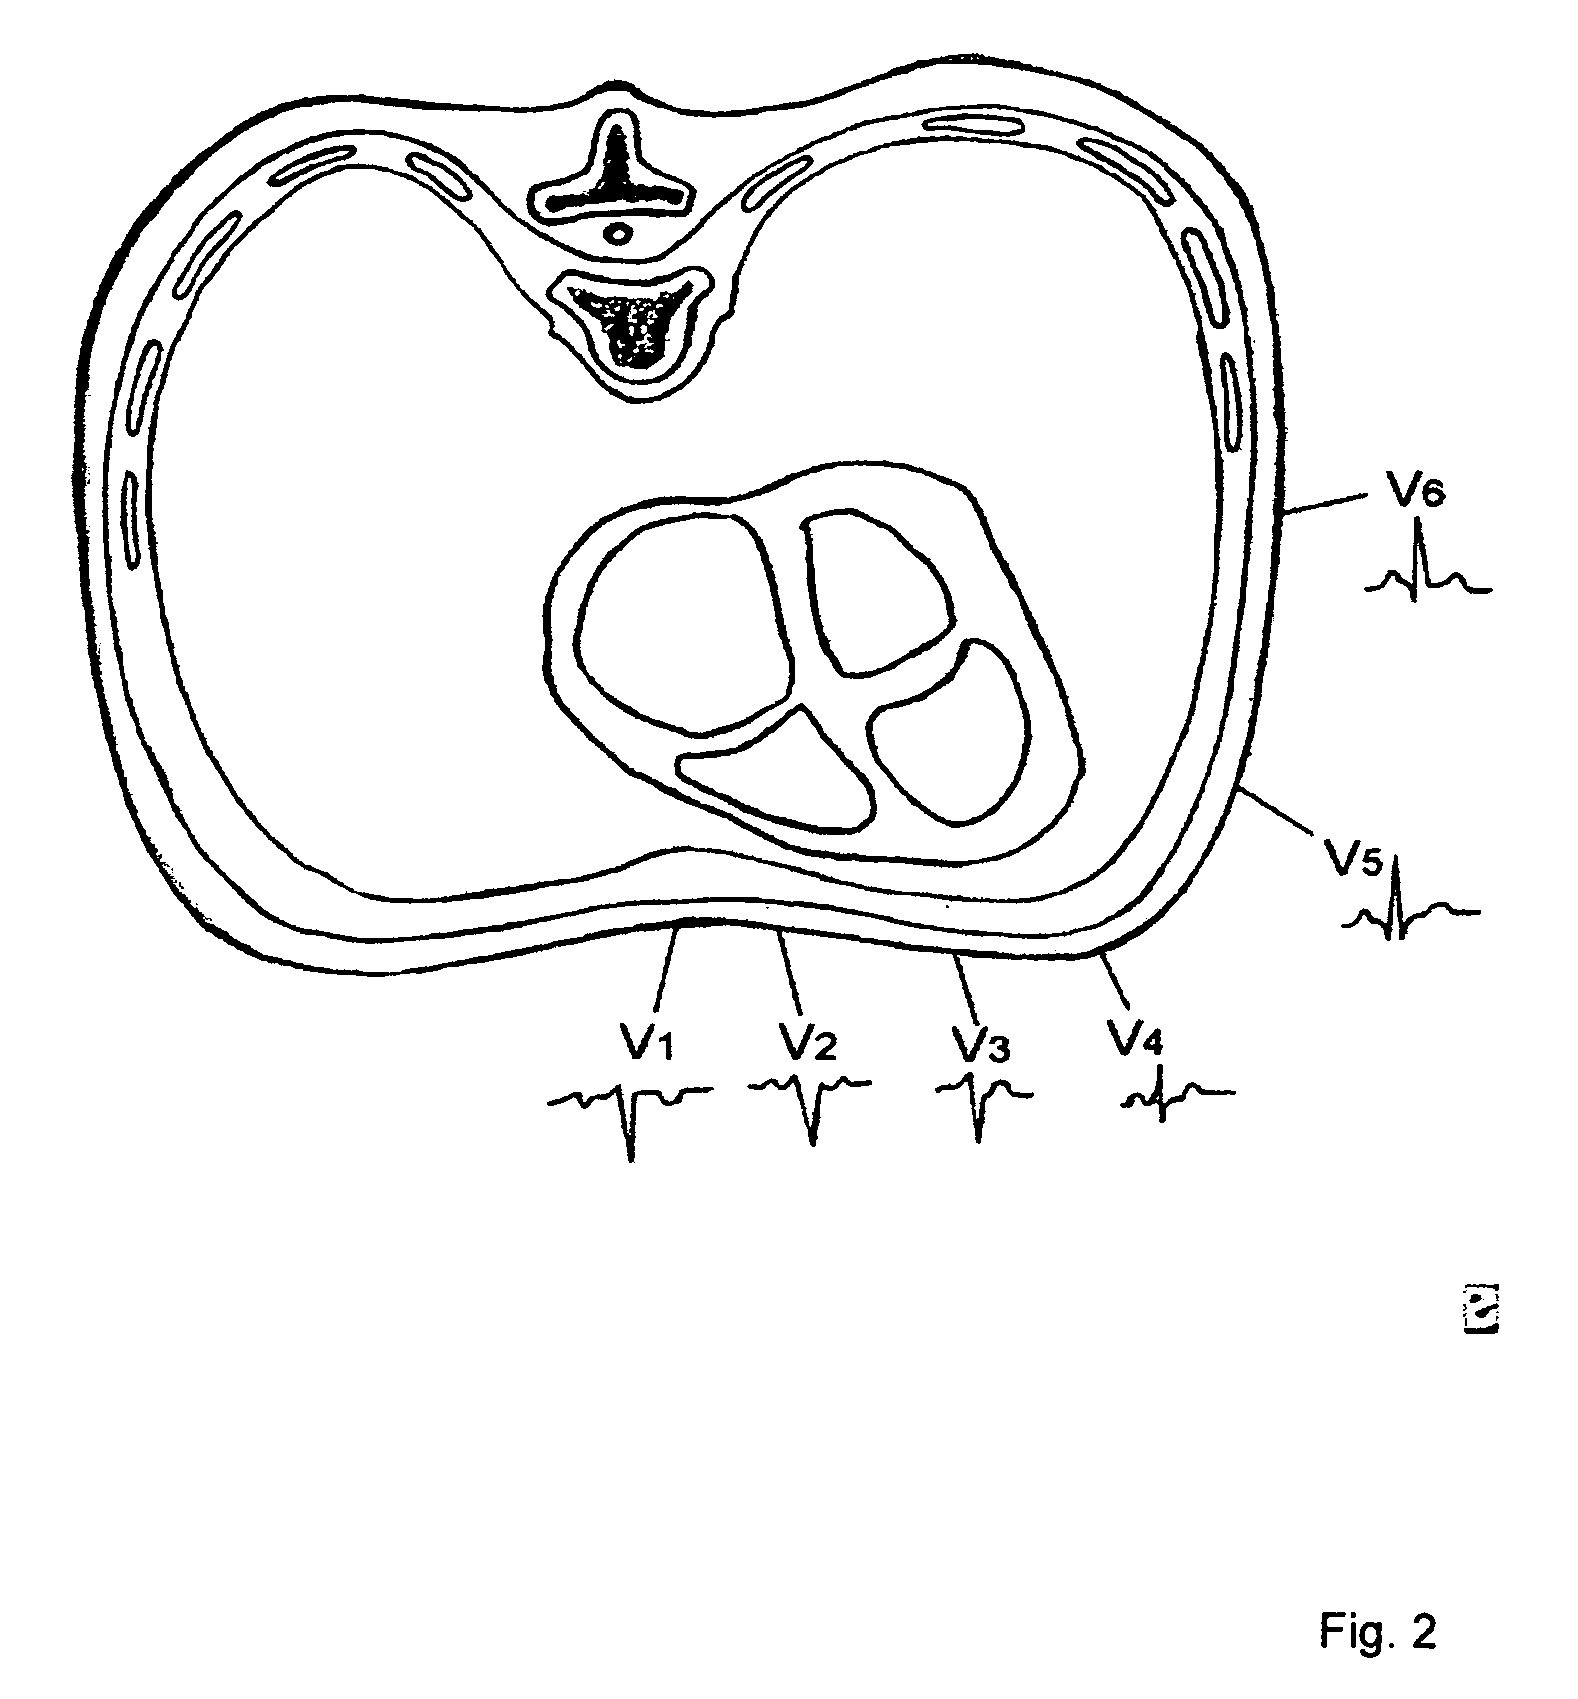 Method of finding the source of and treating cardiac arrhythmias